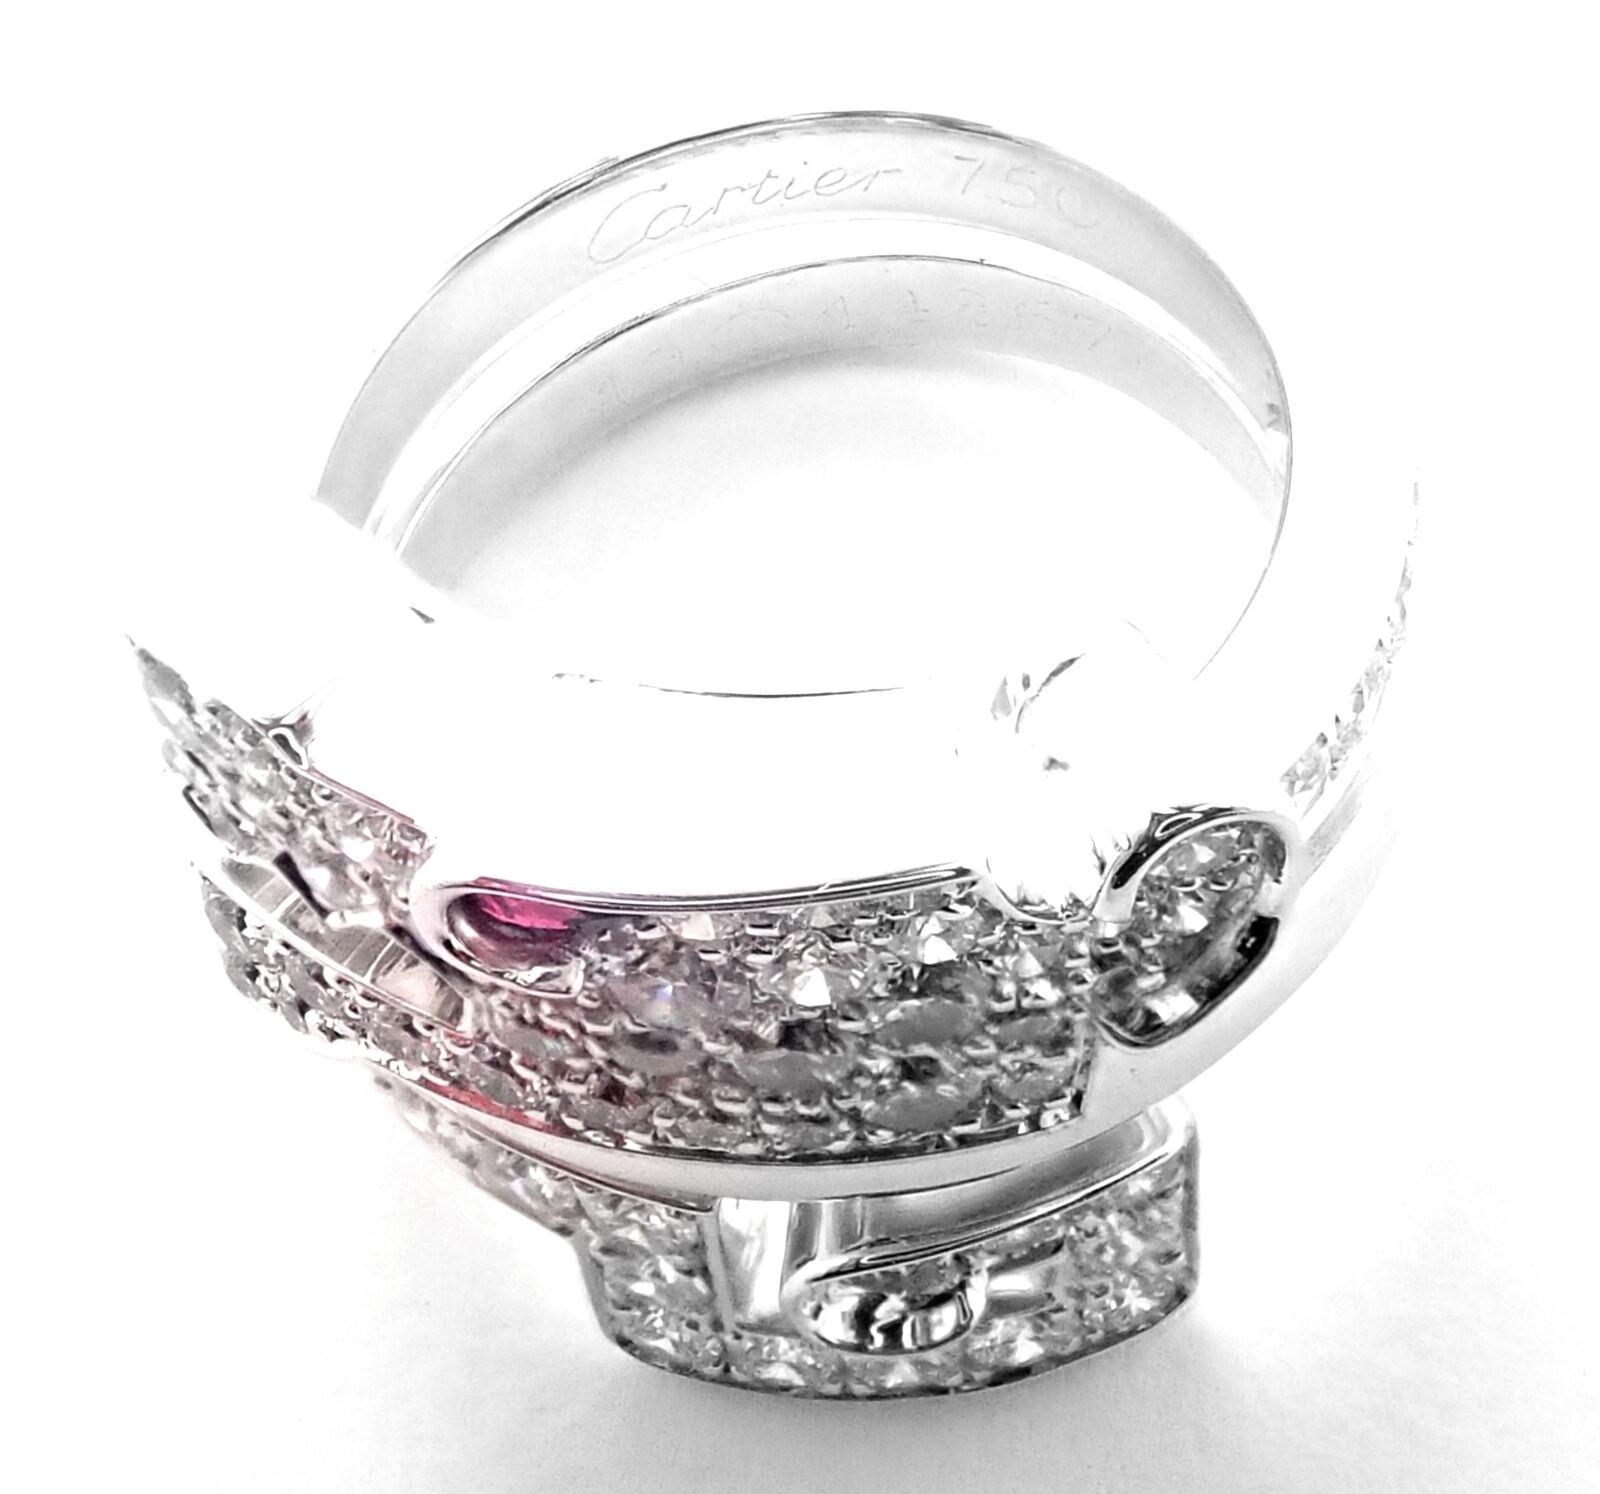 Cartier Le Baiser Du Dragon Ruby Diamond Gold Ring In Excellent Condition For Sale In Holland, PA